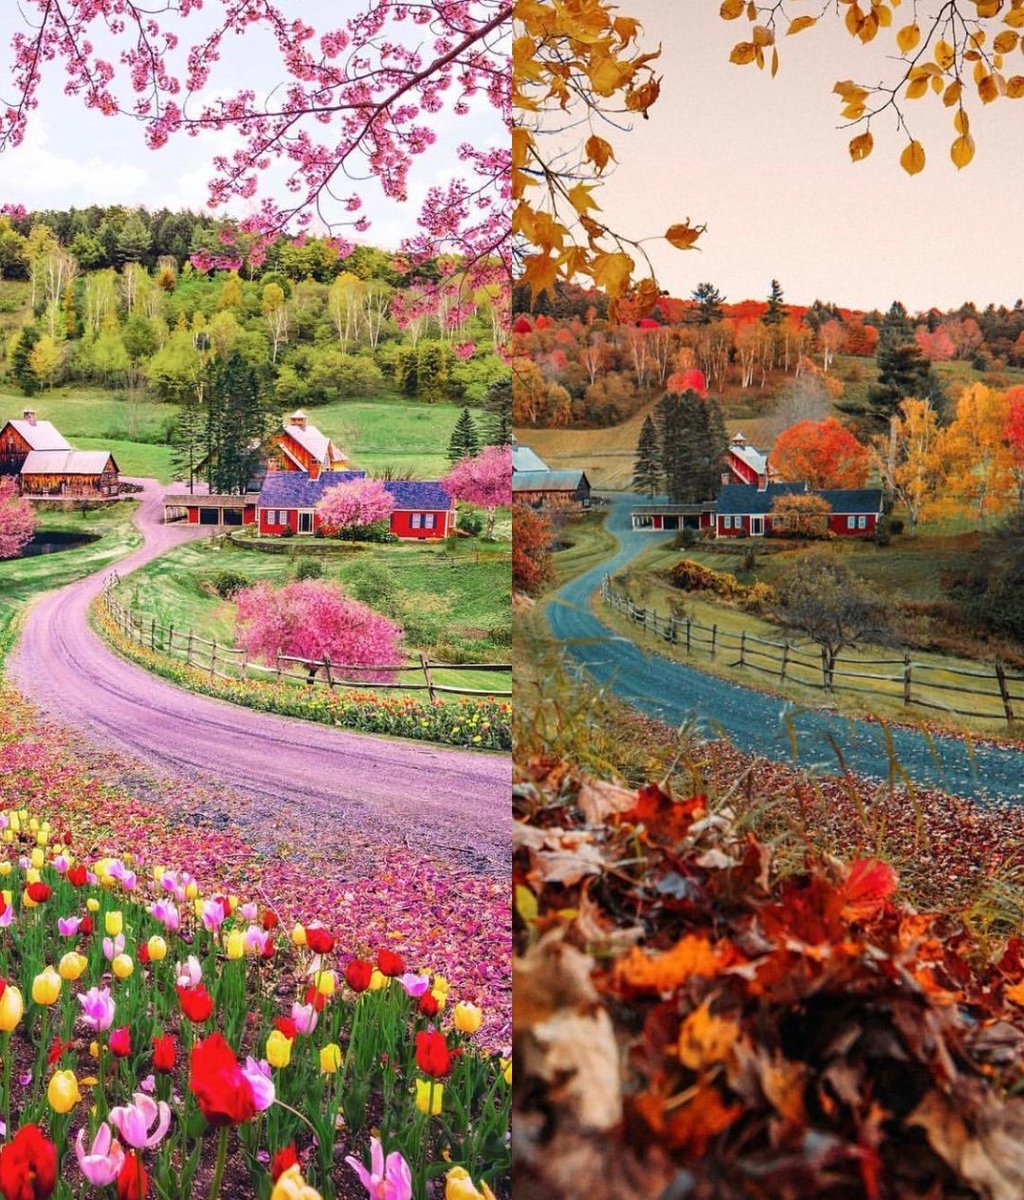 Spring and Autumn in Vermont